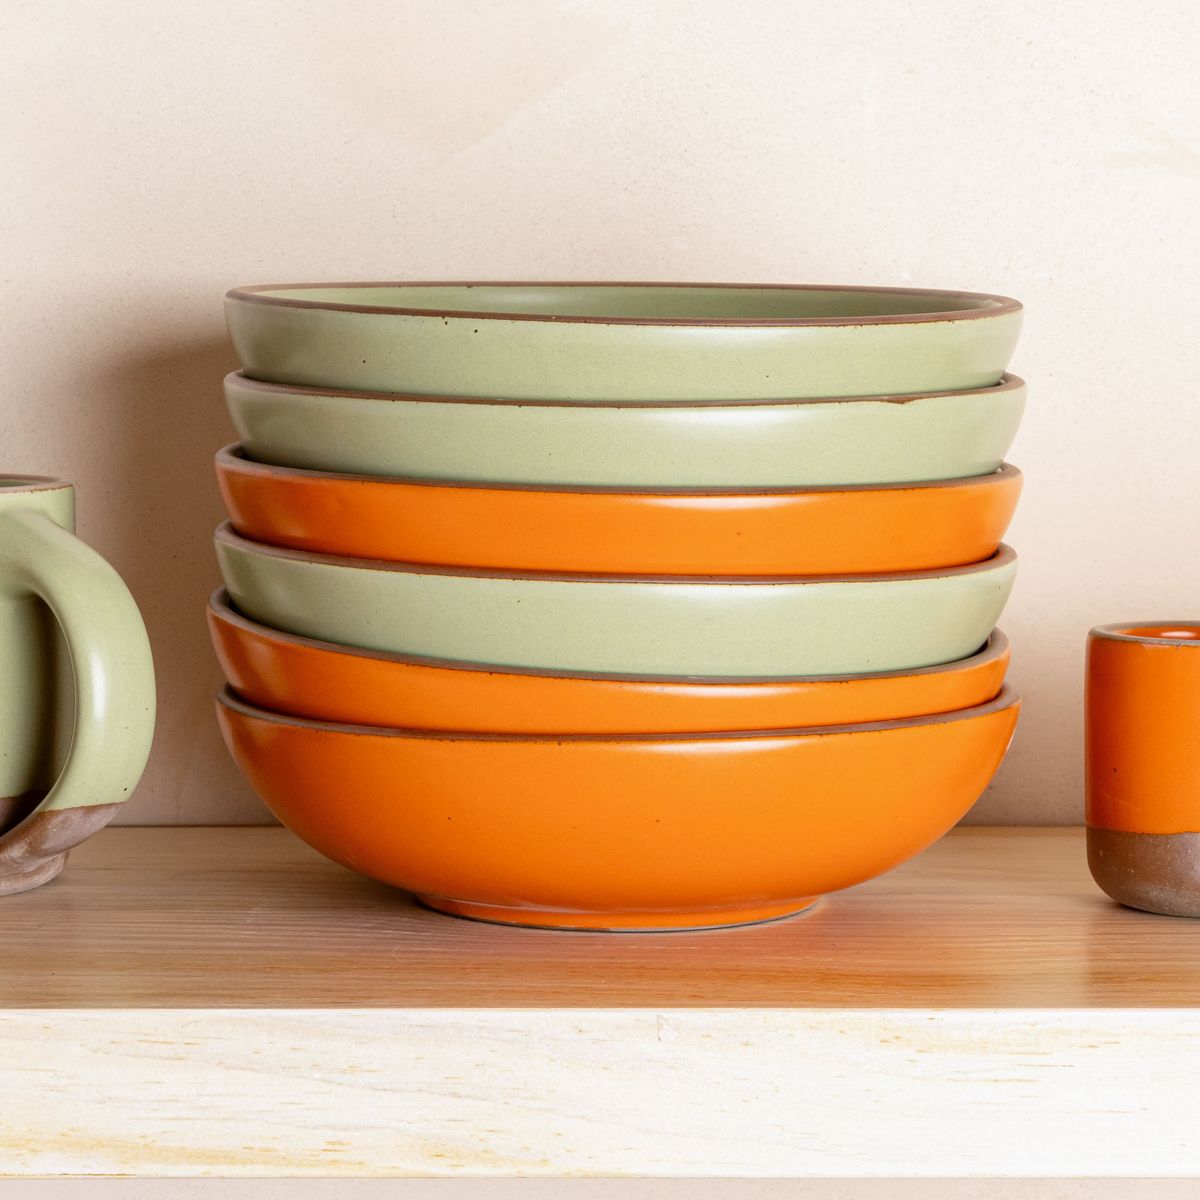 A stack of shallow dinner bowls in calming sage green and bold orange colors.